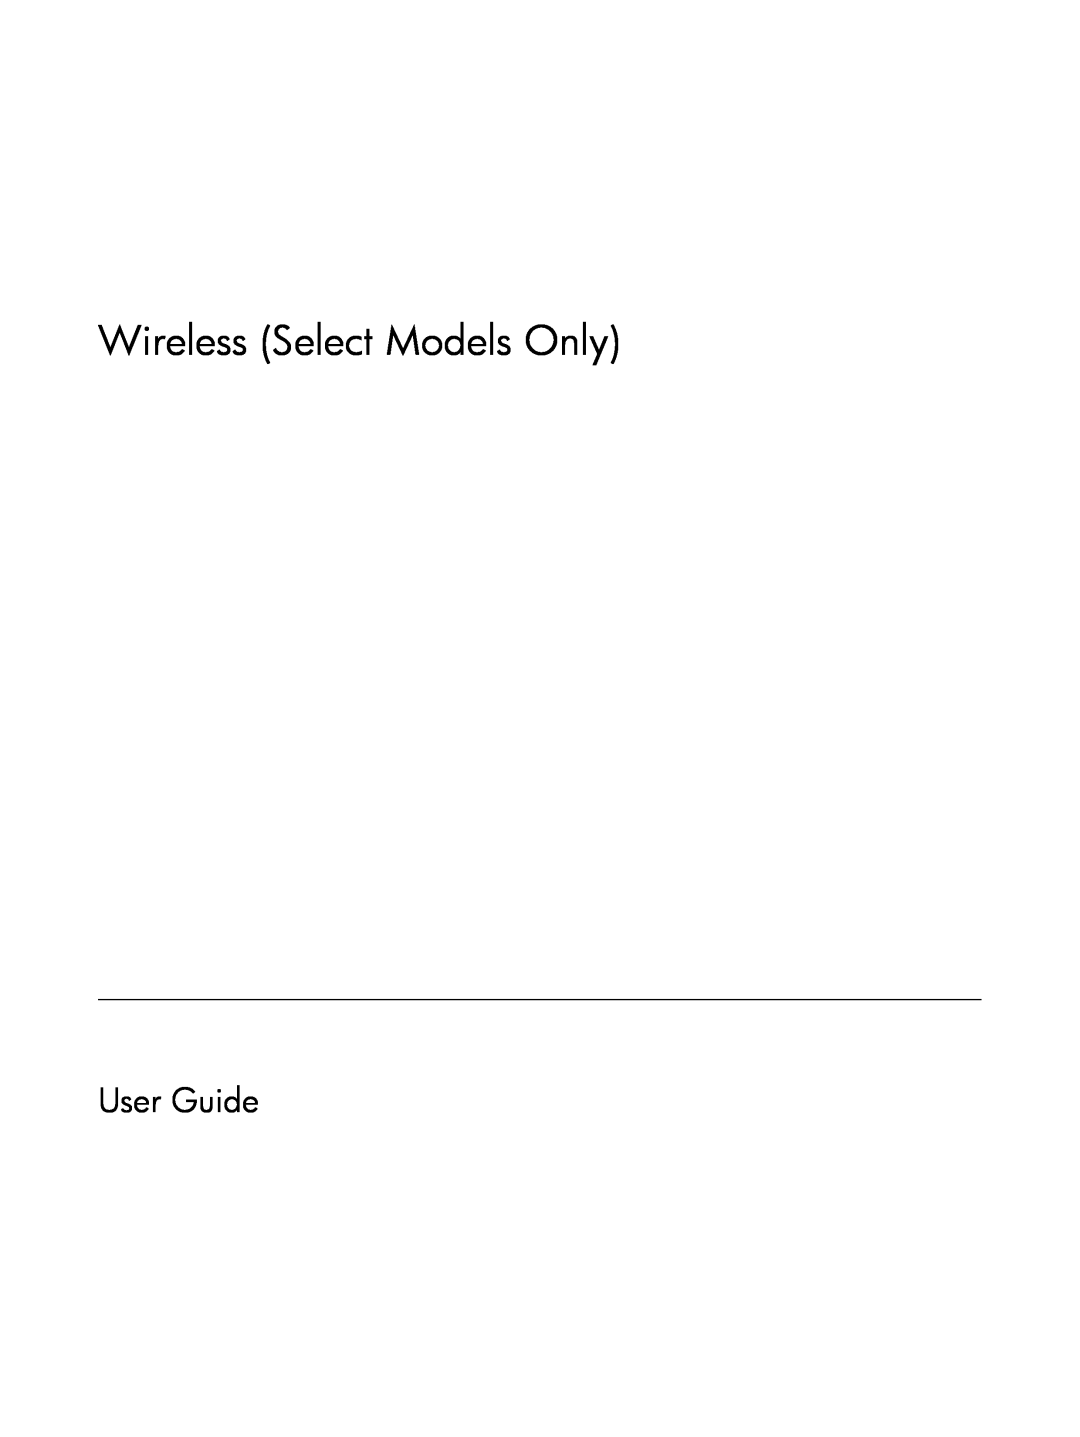 HP V3930TU, V3523TU, V3931TU, V3929TU, V3928TU, V3927TU, V3925TU, V3923TU, V3922TU manual Wireless Select Models Only, User Guide 